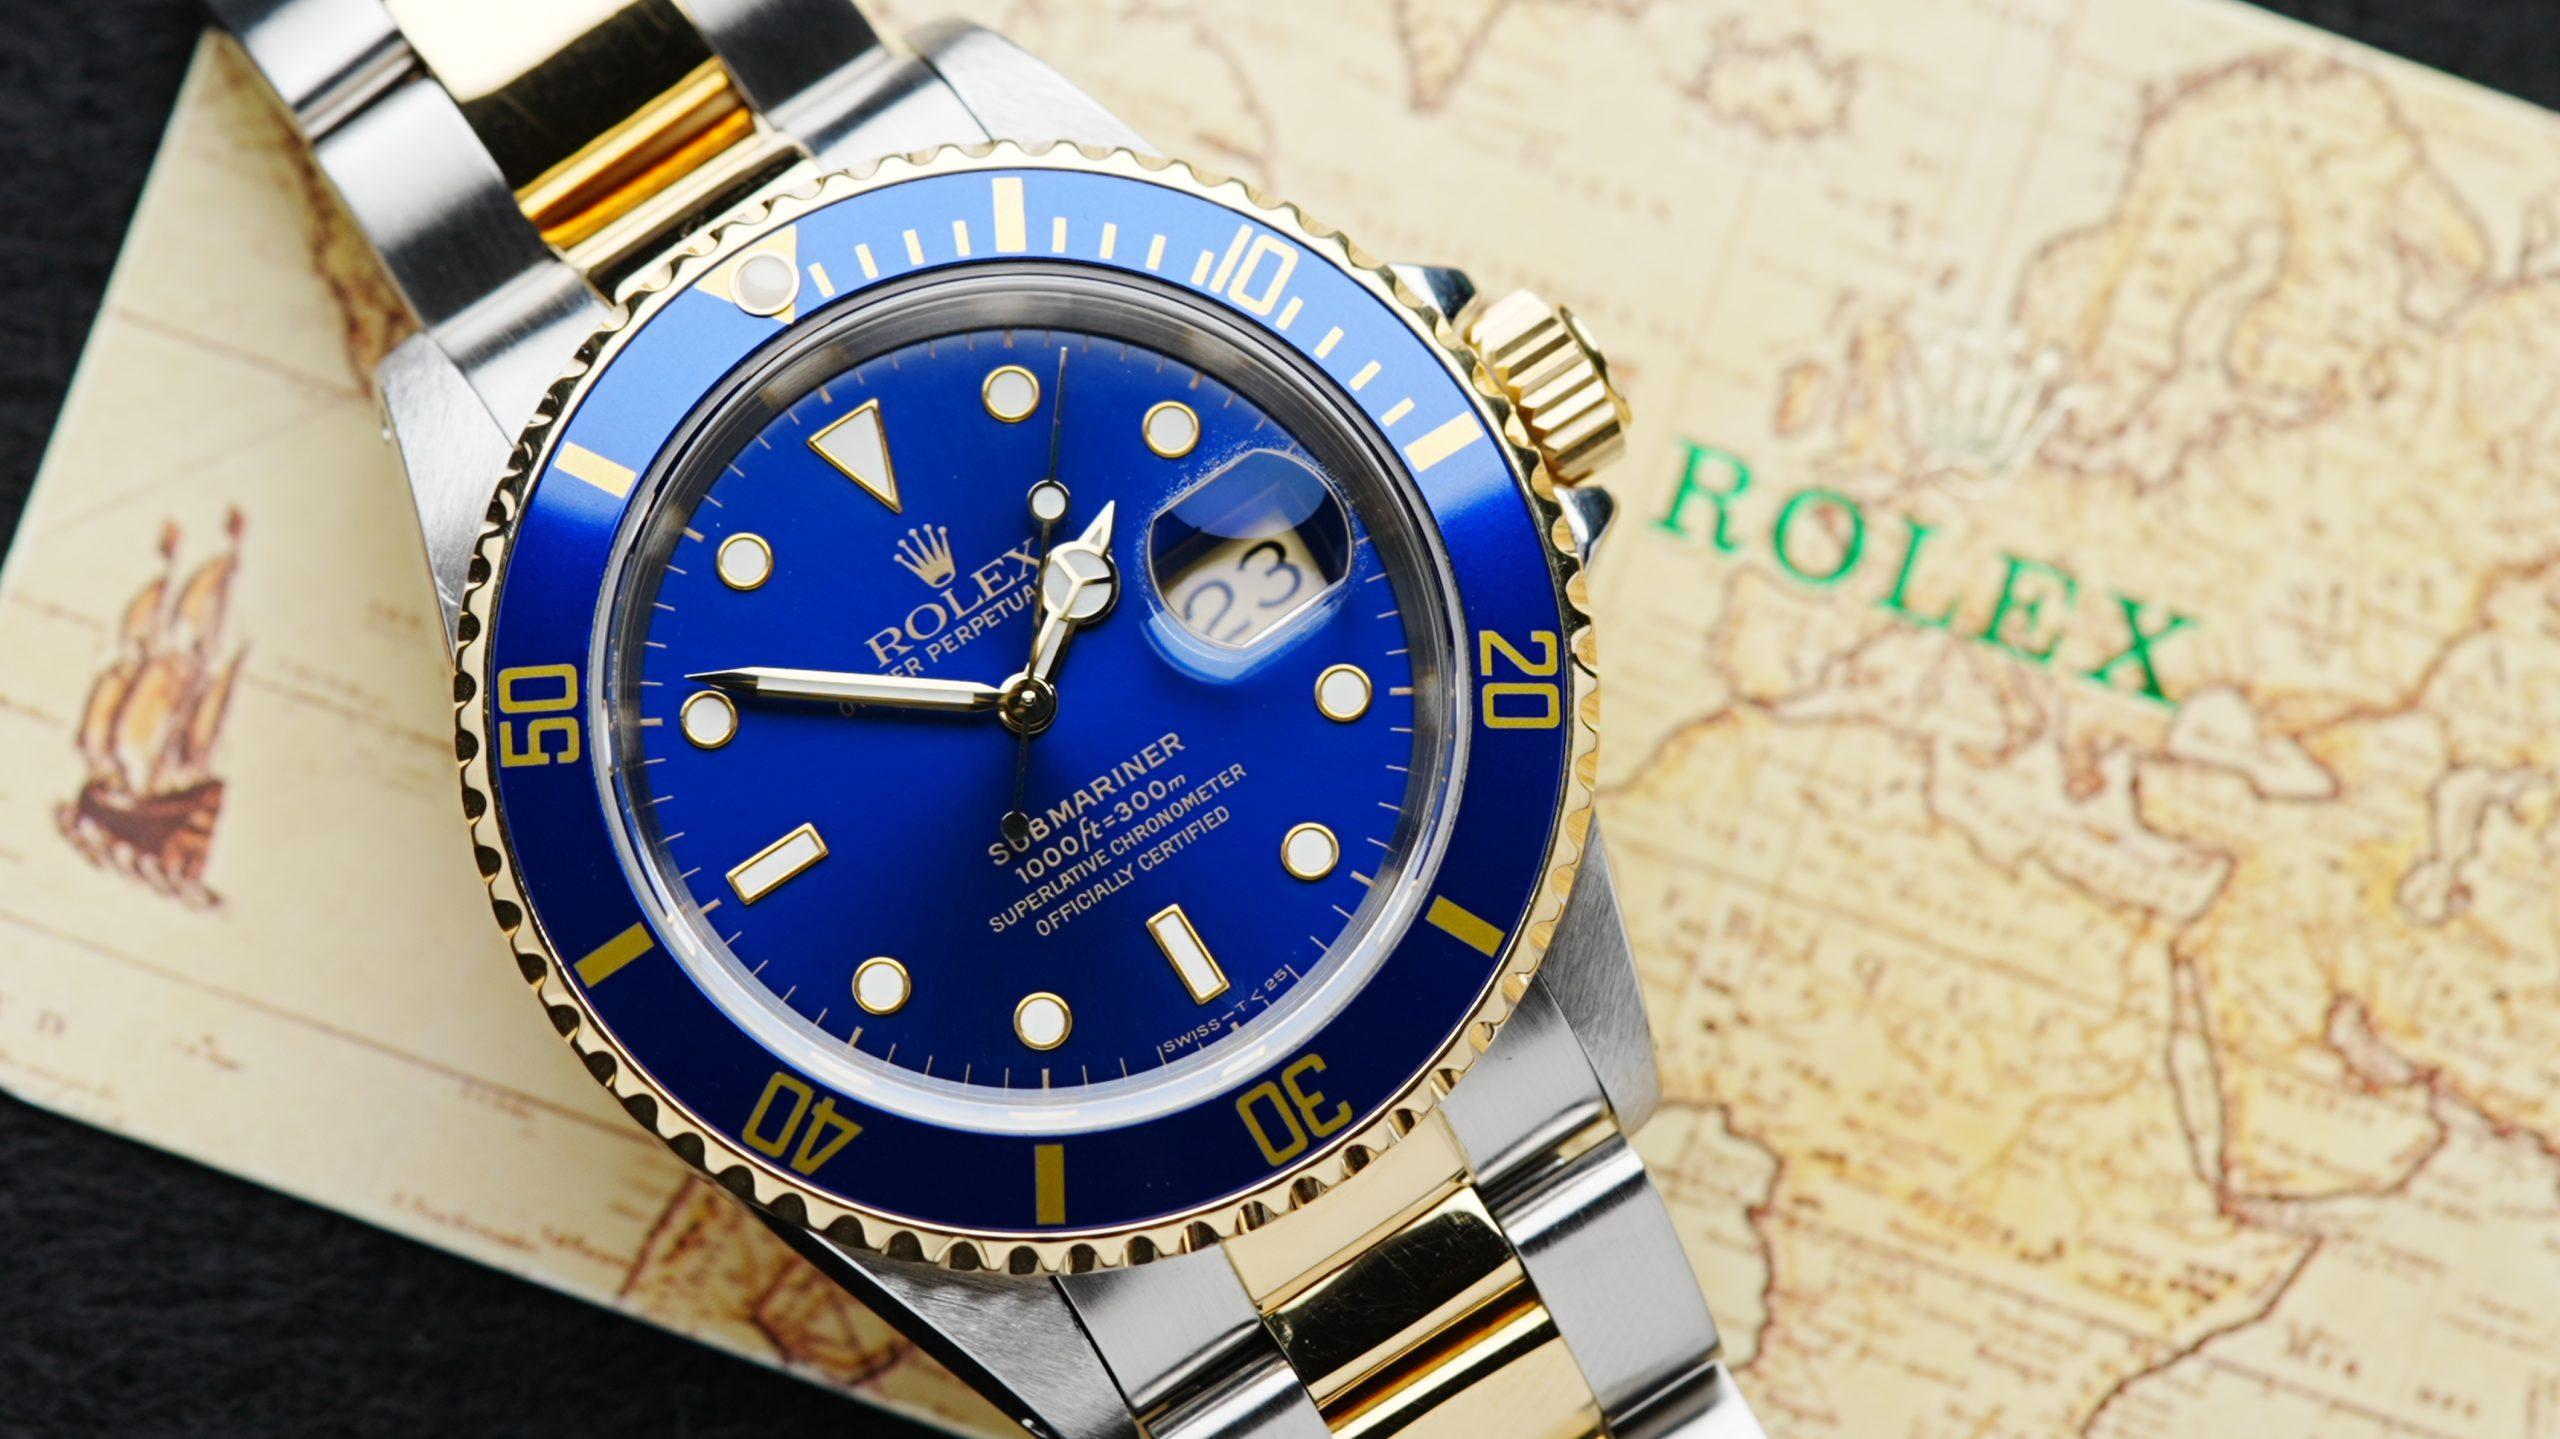 Rolex Submariner Date Two Tone Blusey 1991 up close on Rolex map booklet.